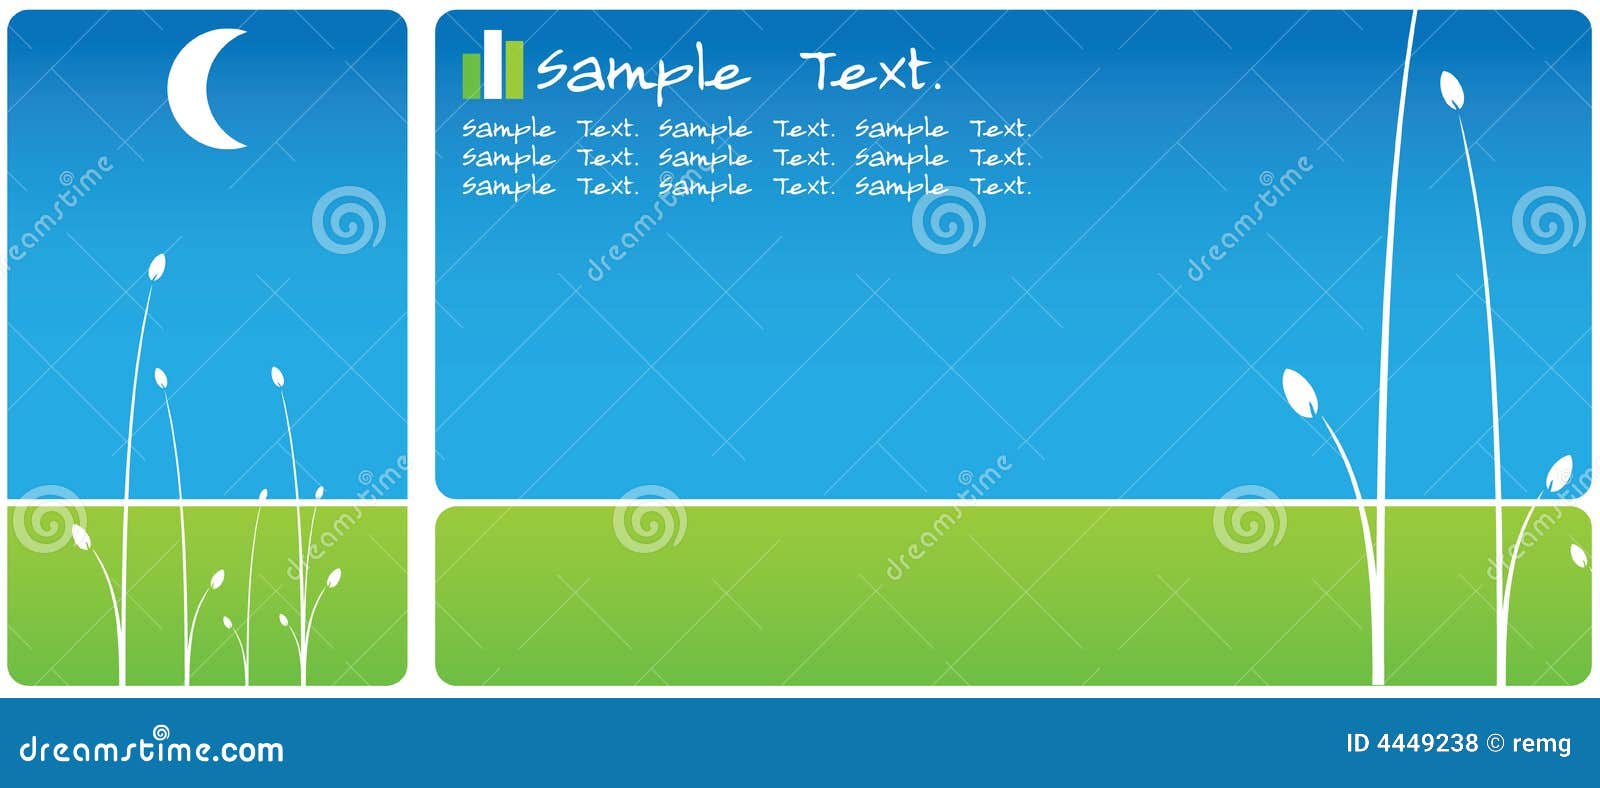 high-quality-template-abstract-background-stock-illustration